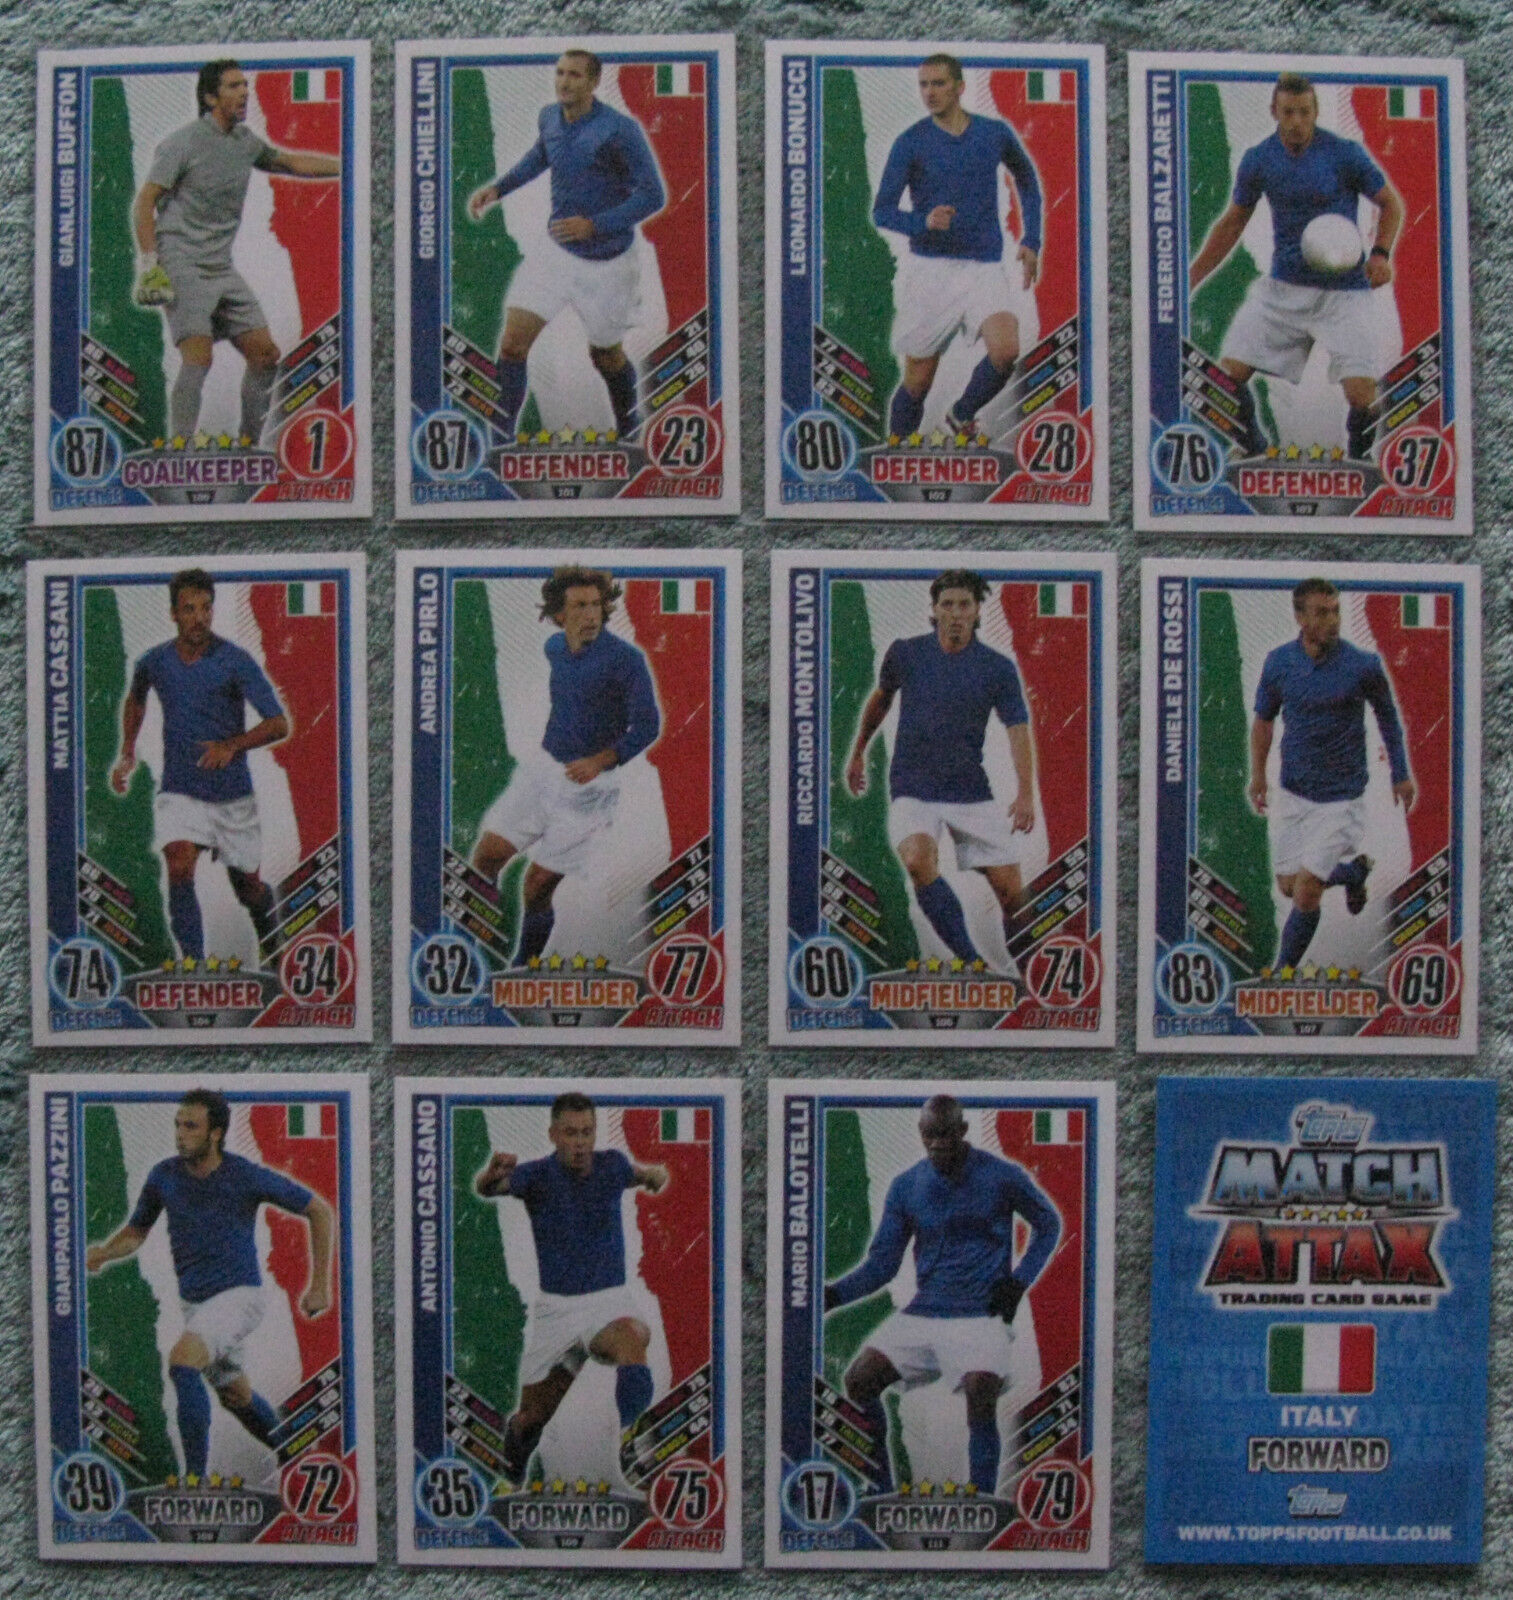 Match Attax TCG Choose One 2012 Italy Card from List (Euro 2012 England)